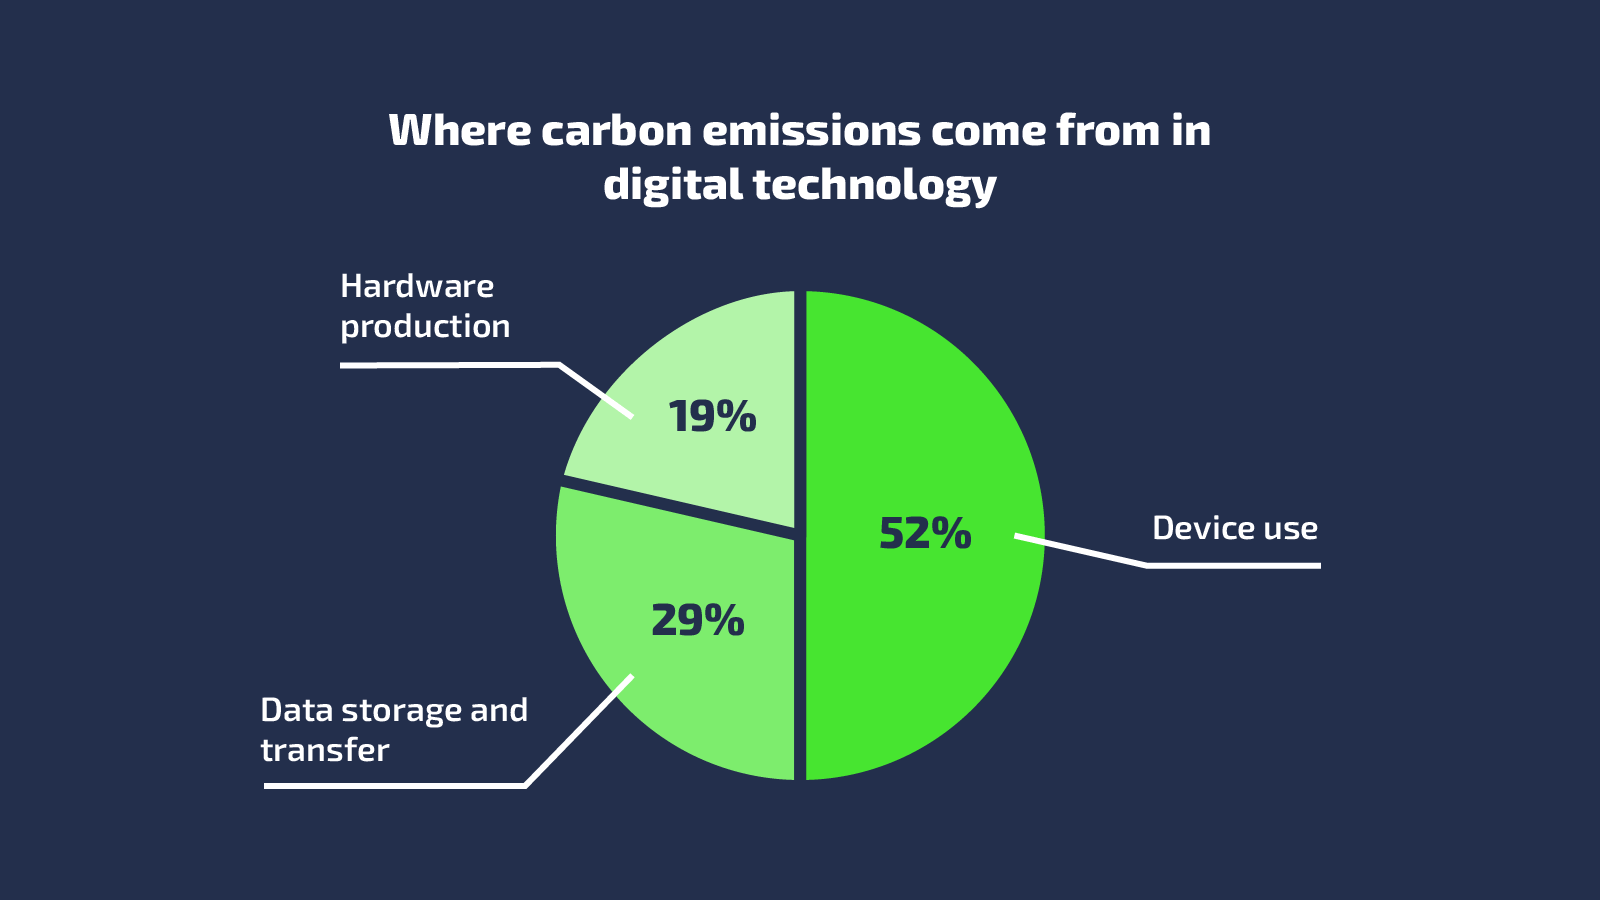 Pie chart showing carbon emission sources, 52% from device use, 29% from data storage and transfer, and 19% from hardware production